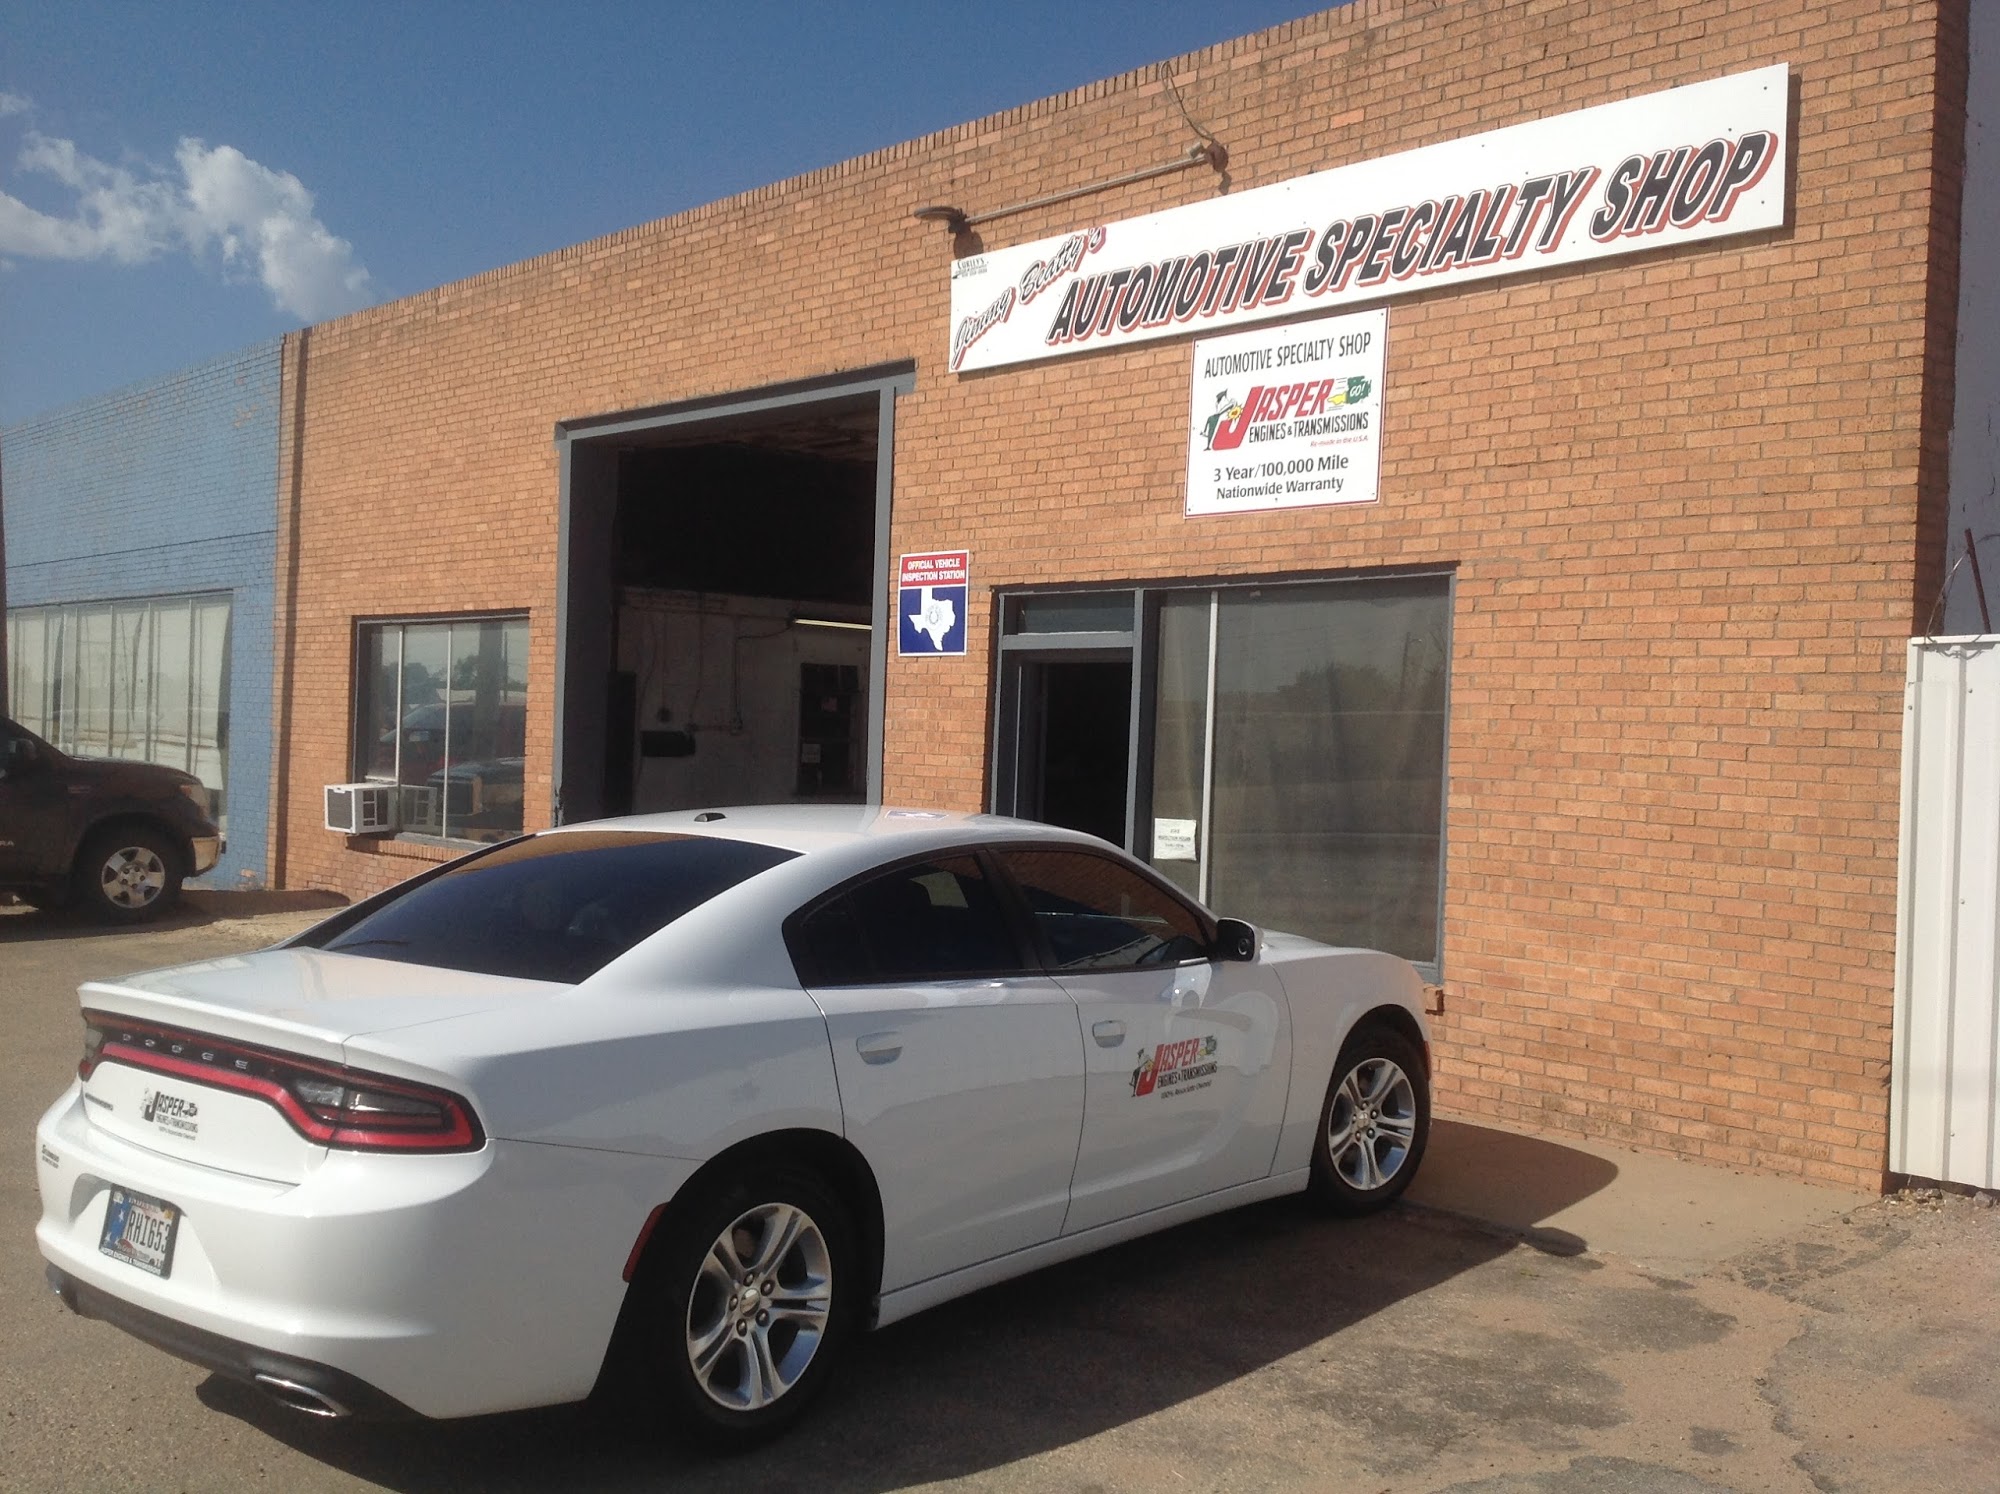 Automotive Specialty Shop Towing and Recovery